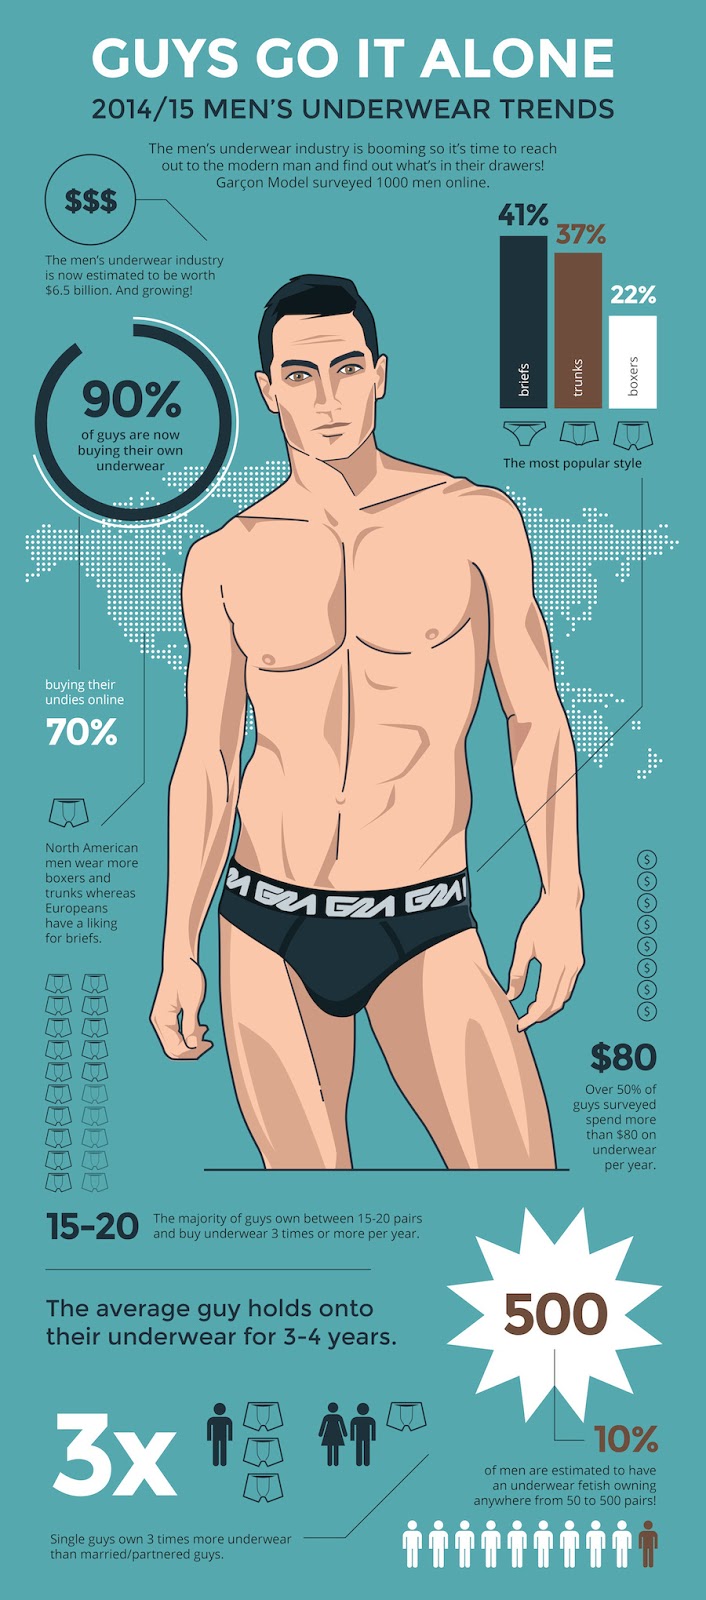 Mens underwear trends and habits for 2015